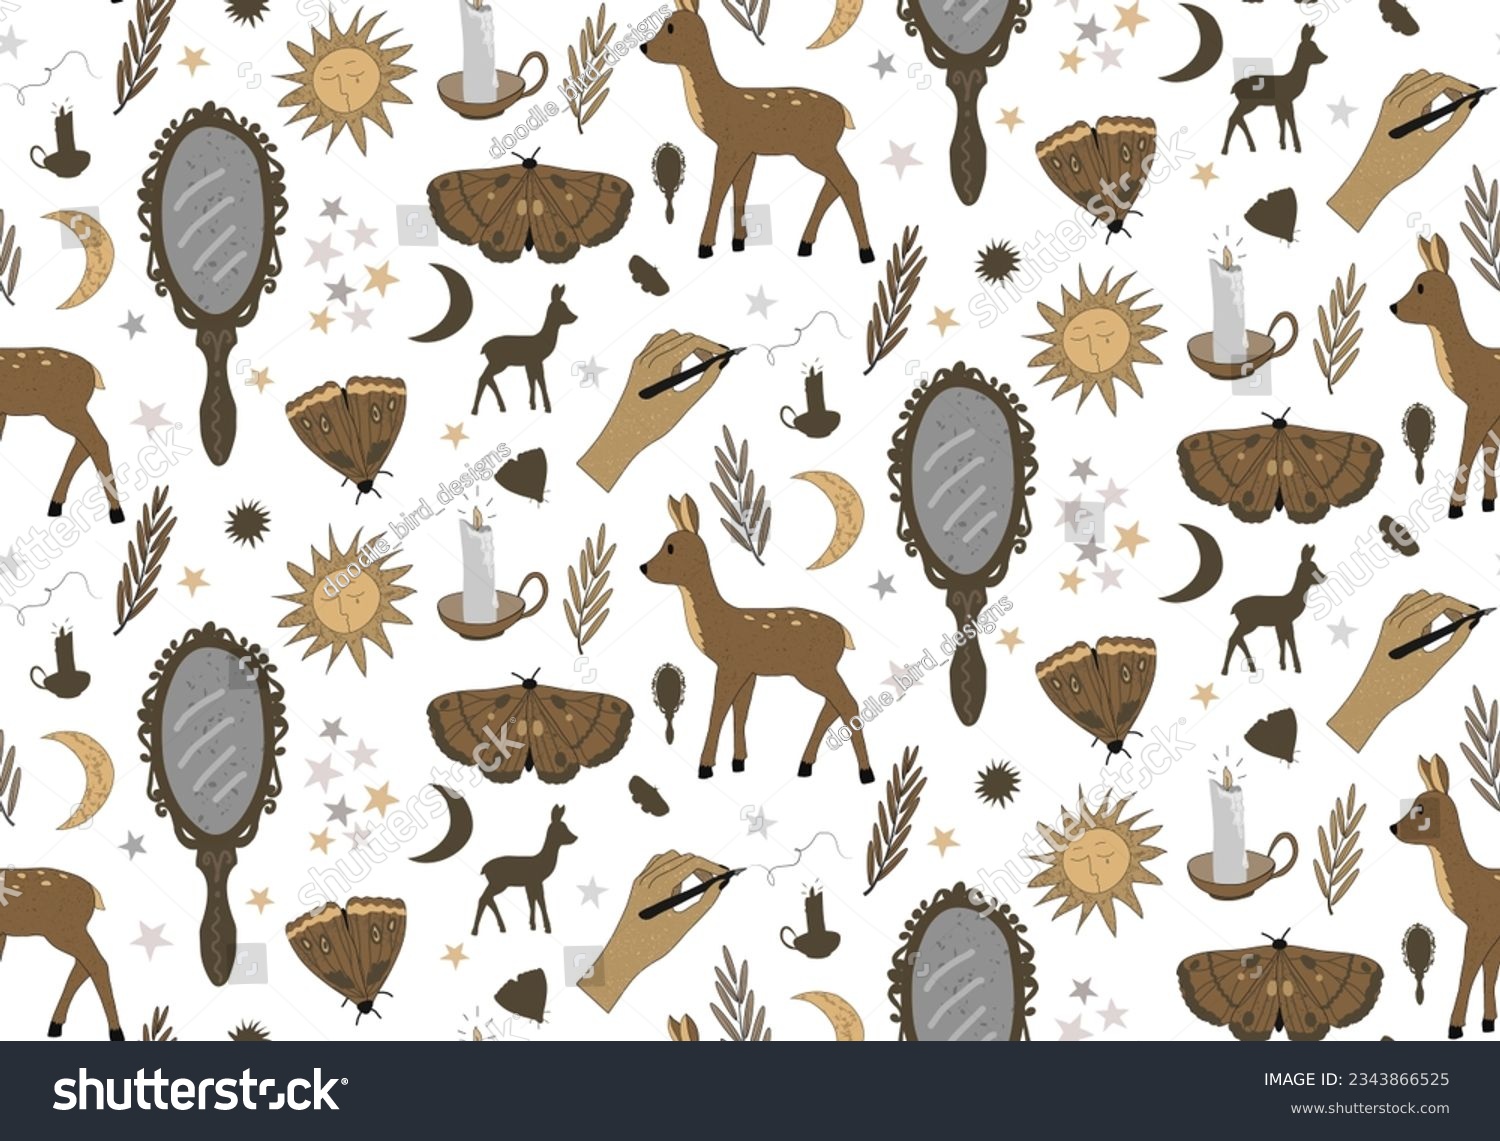 SVG of Spooky season repeat pattern of brown magic elements on white background. Stylish witchcraft vector design for Halloween.  svg